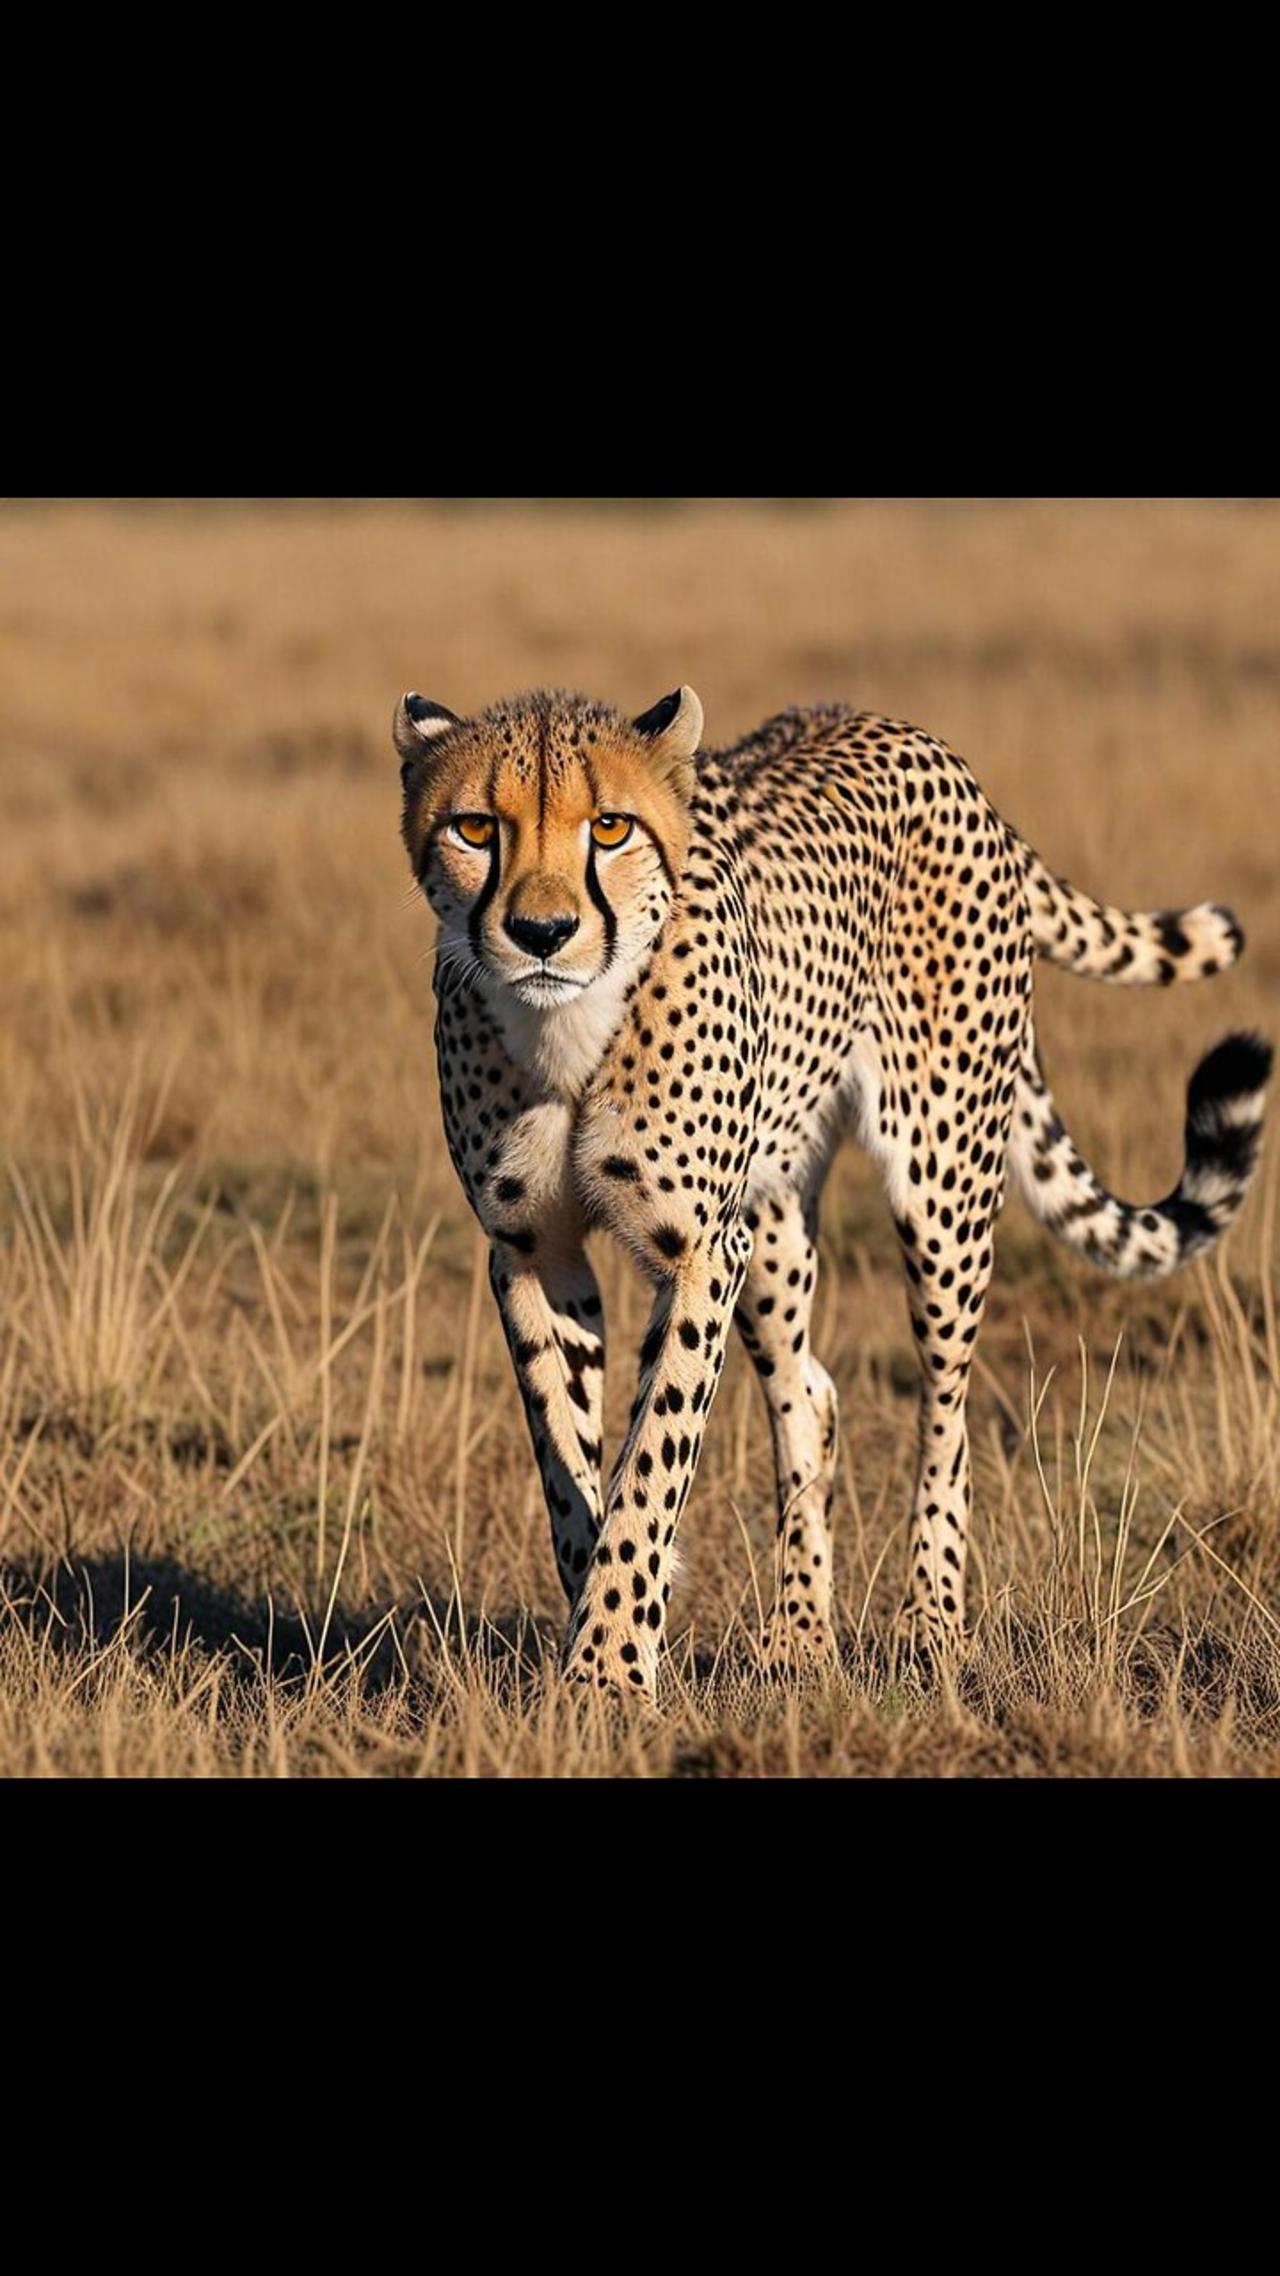 Cheetah Hunting in the Wild  Teaching Cubs to Survive #facts #animals #forest #foryou